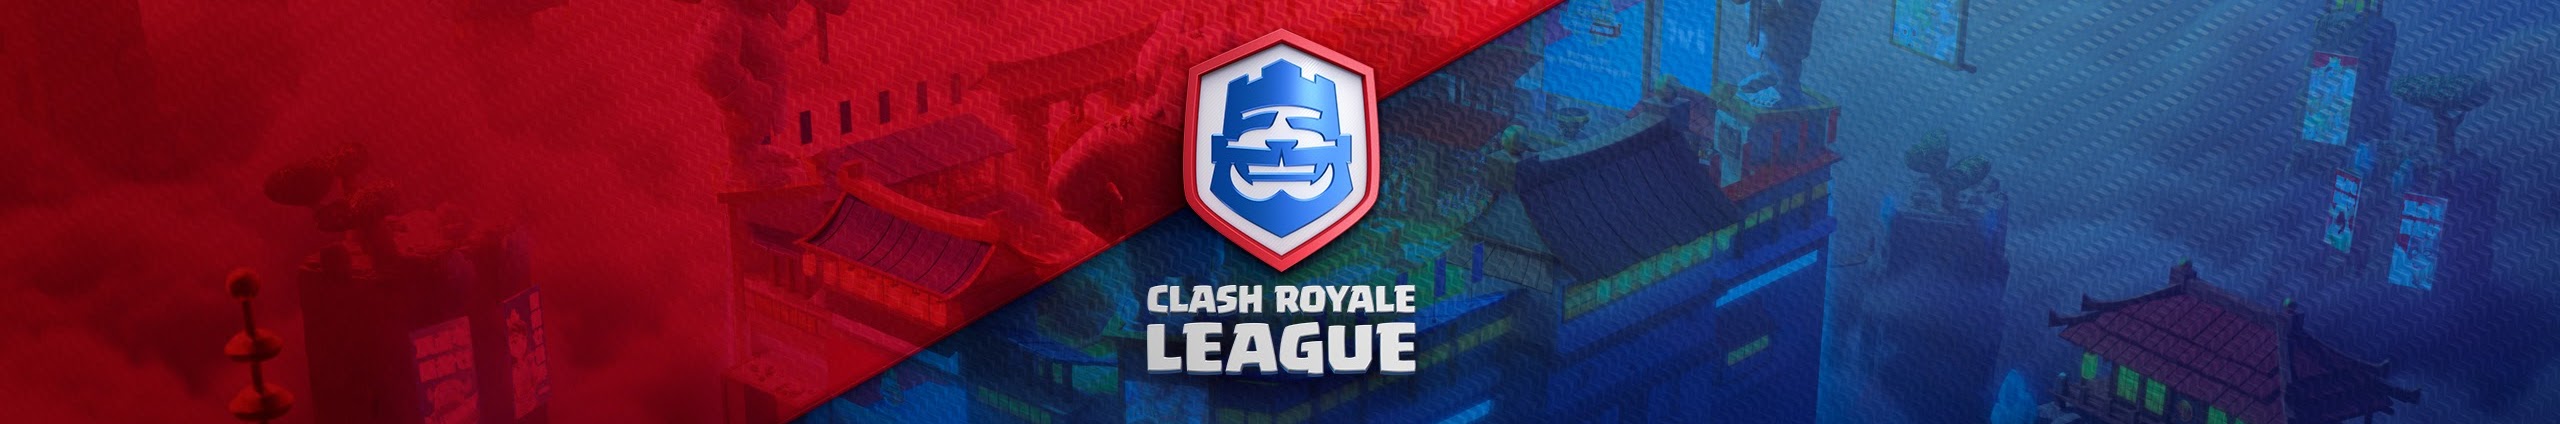 Crl West 19 ウェストのチームと選手 Teams Players クラロワ 攻略メモ 観戦ガイド Wiki